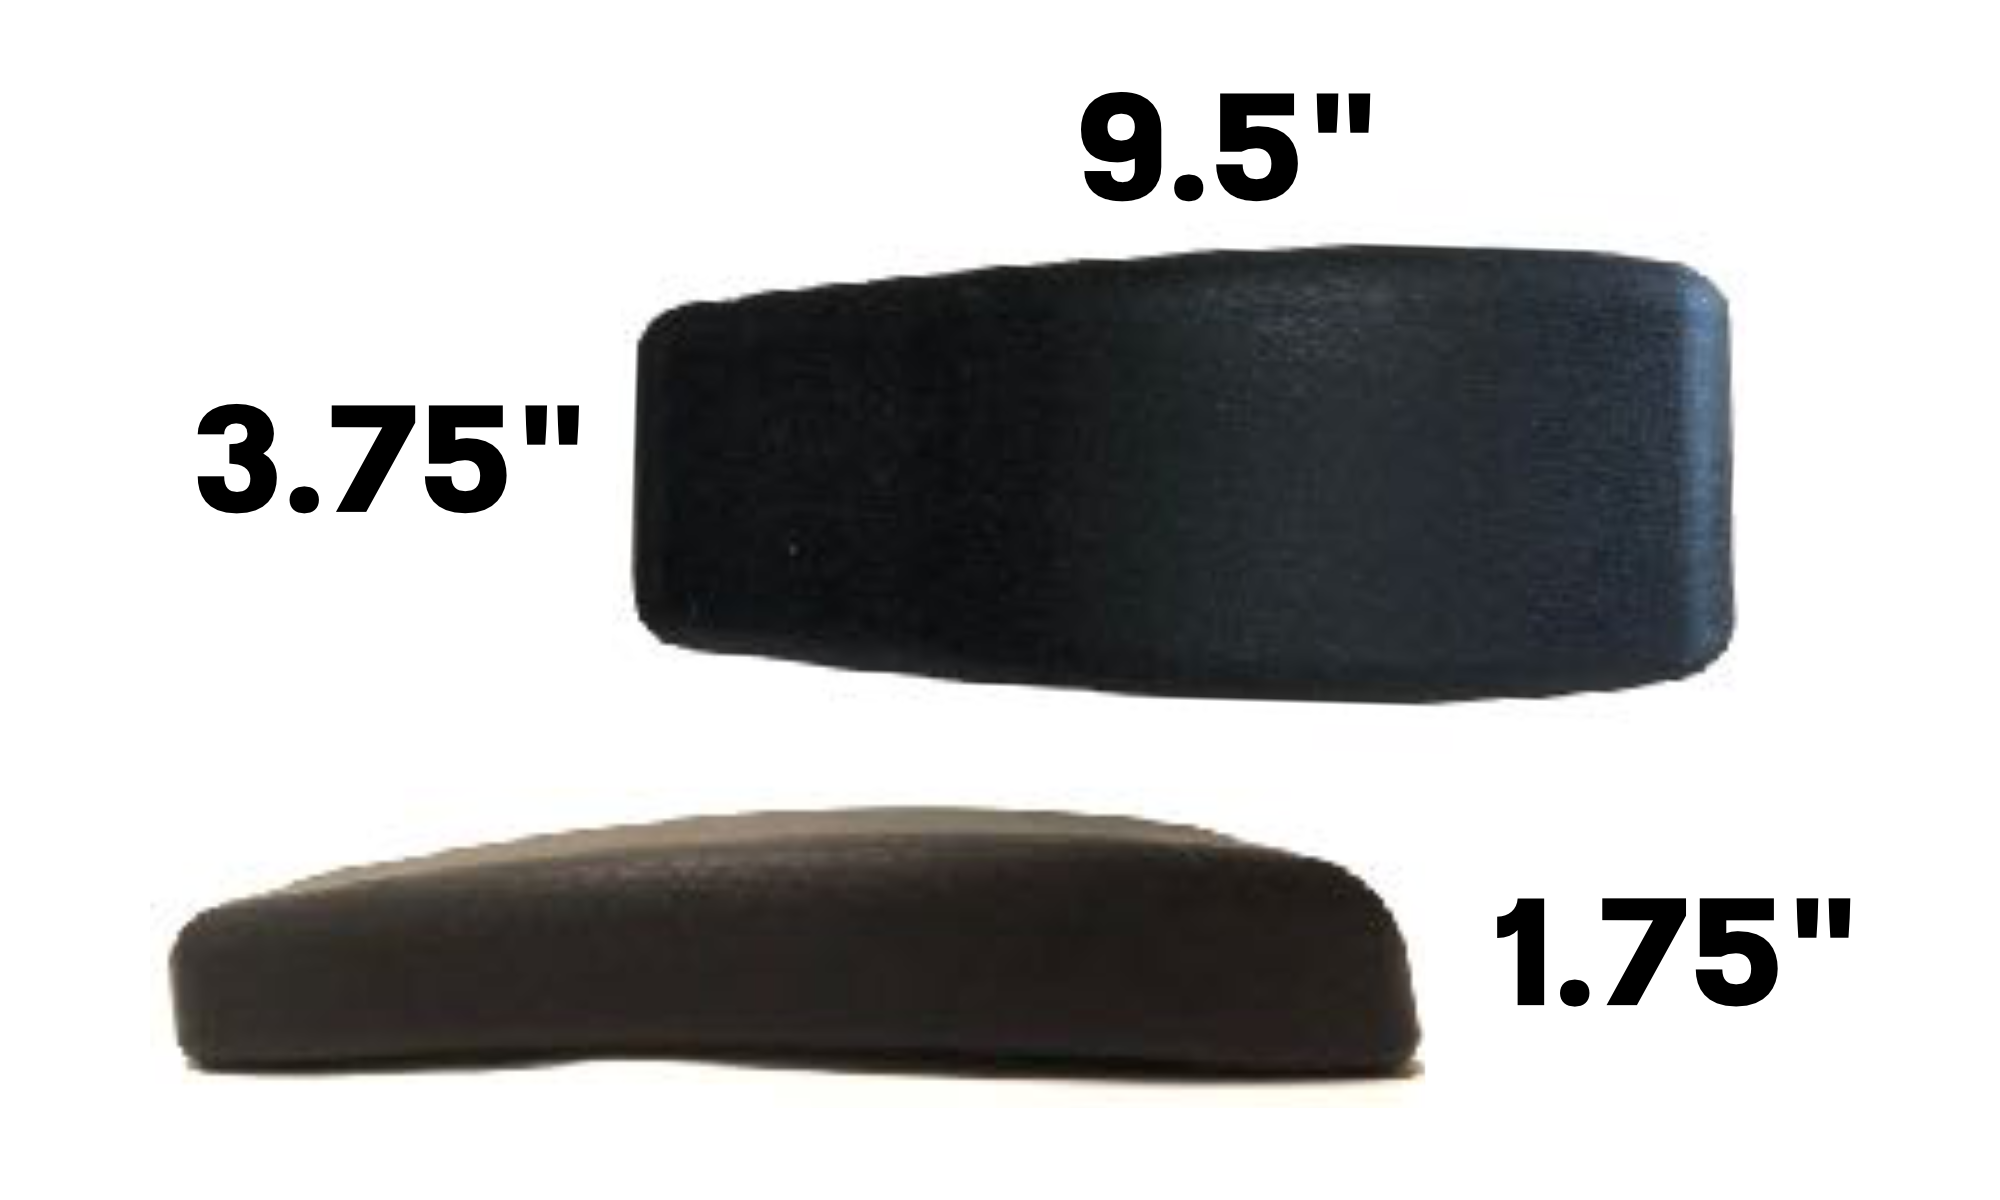 70P - Extra thick, soft urethane pad with metal core